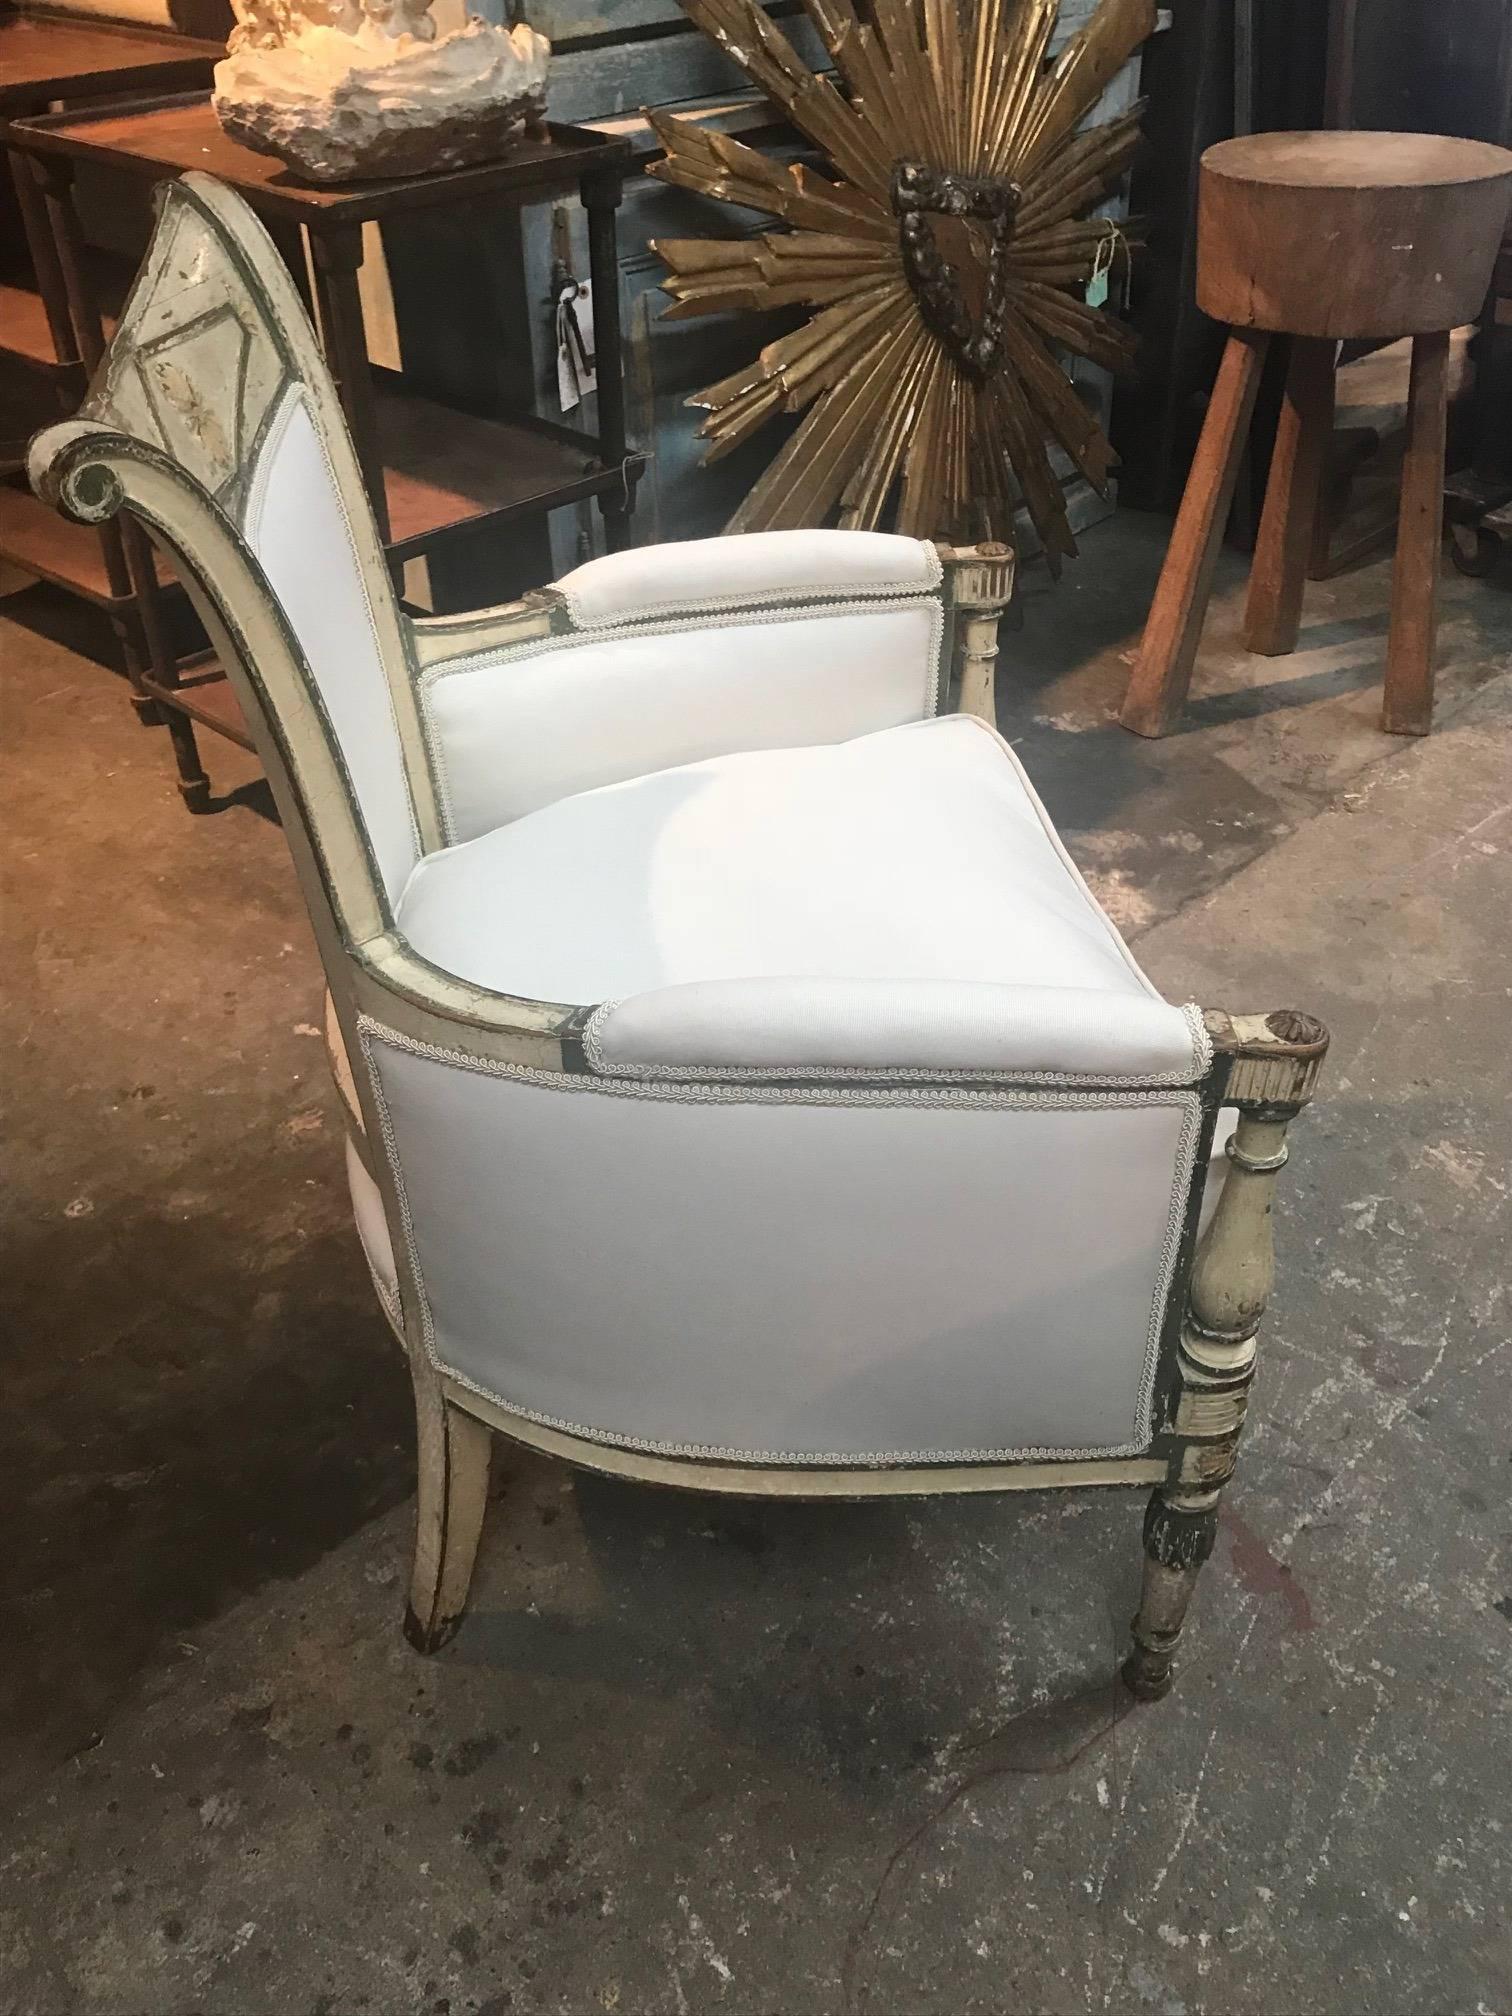 An exceptional French period armchair - Bergere chair. Wonderfully and sturdily constructed with its original polychromed finish. Professionally reupholstered recently. A perfect accent piece for any interior.